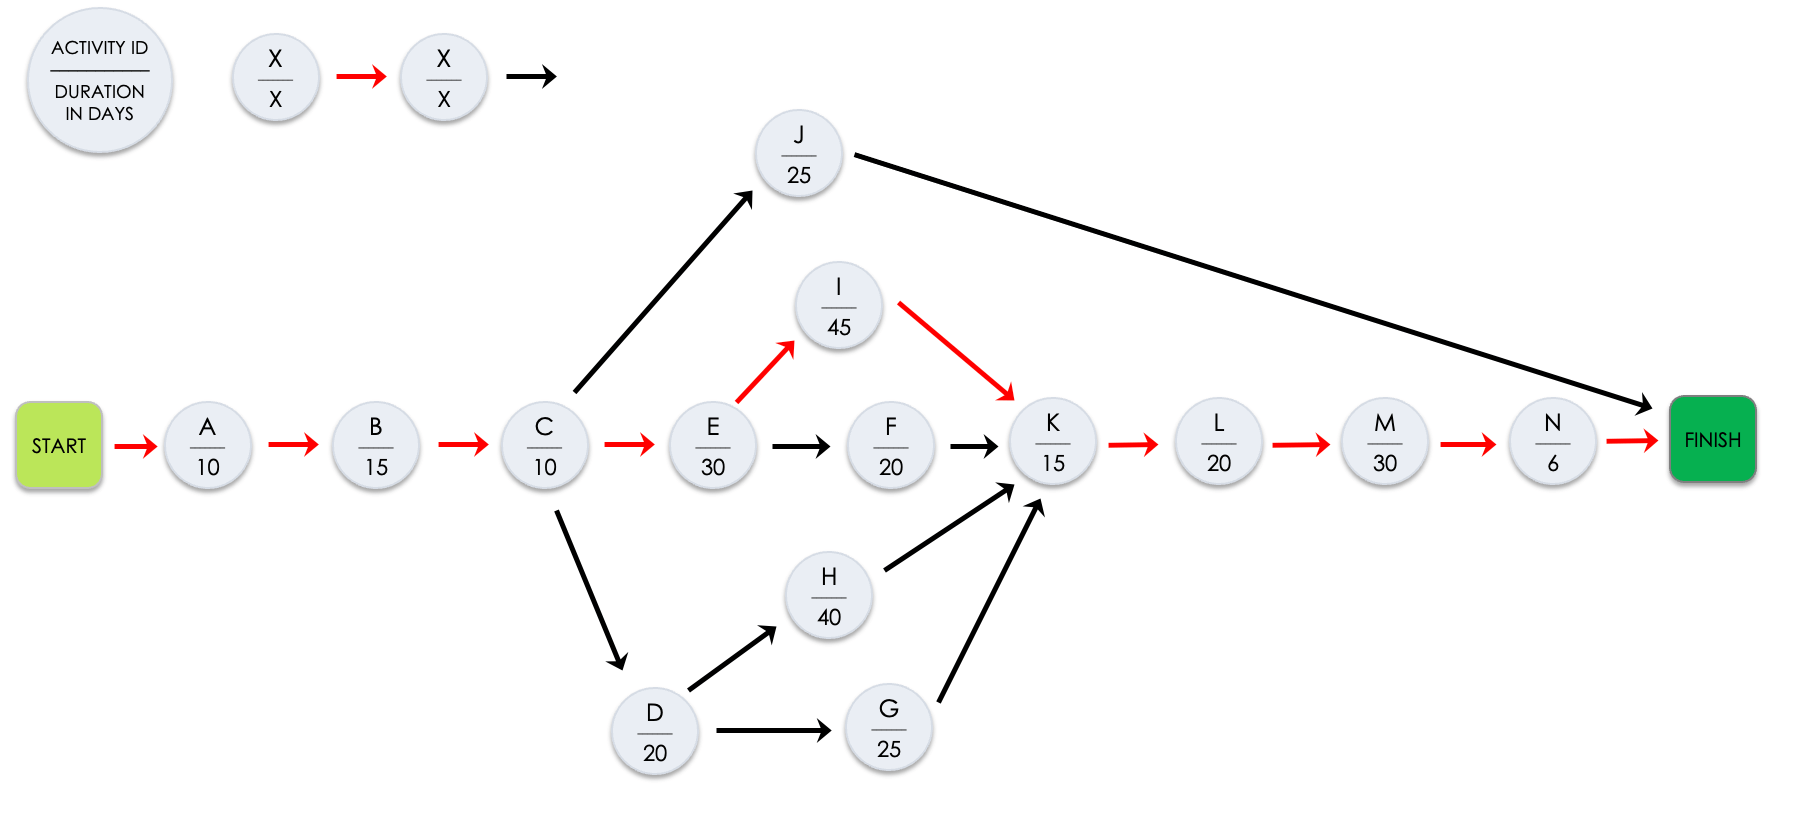 Critical path chart example